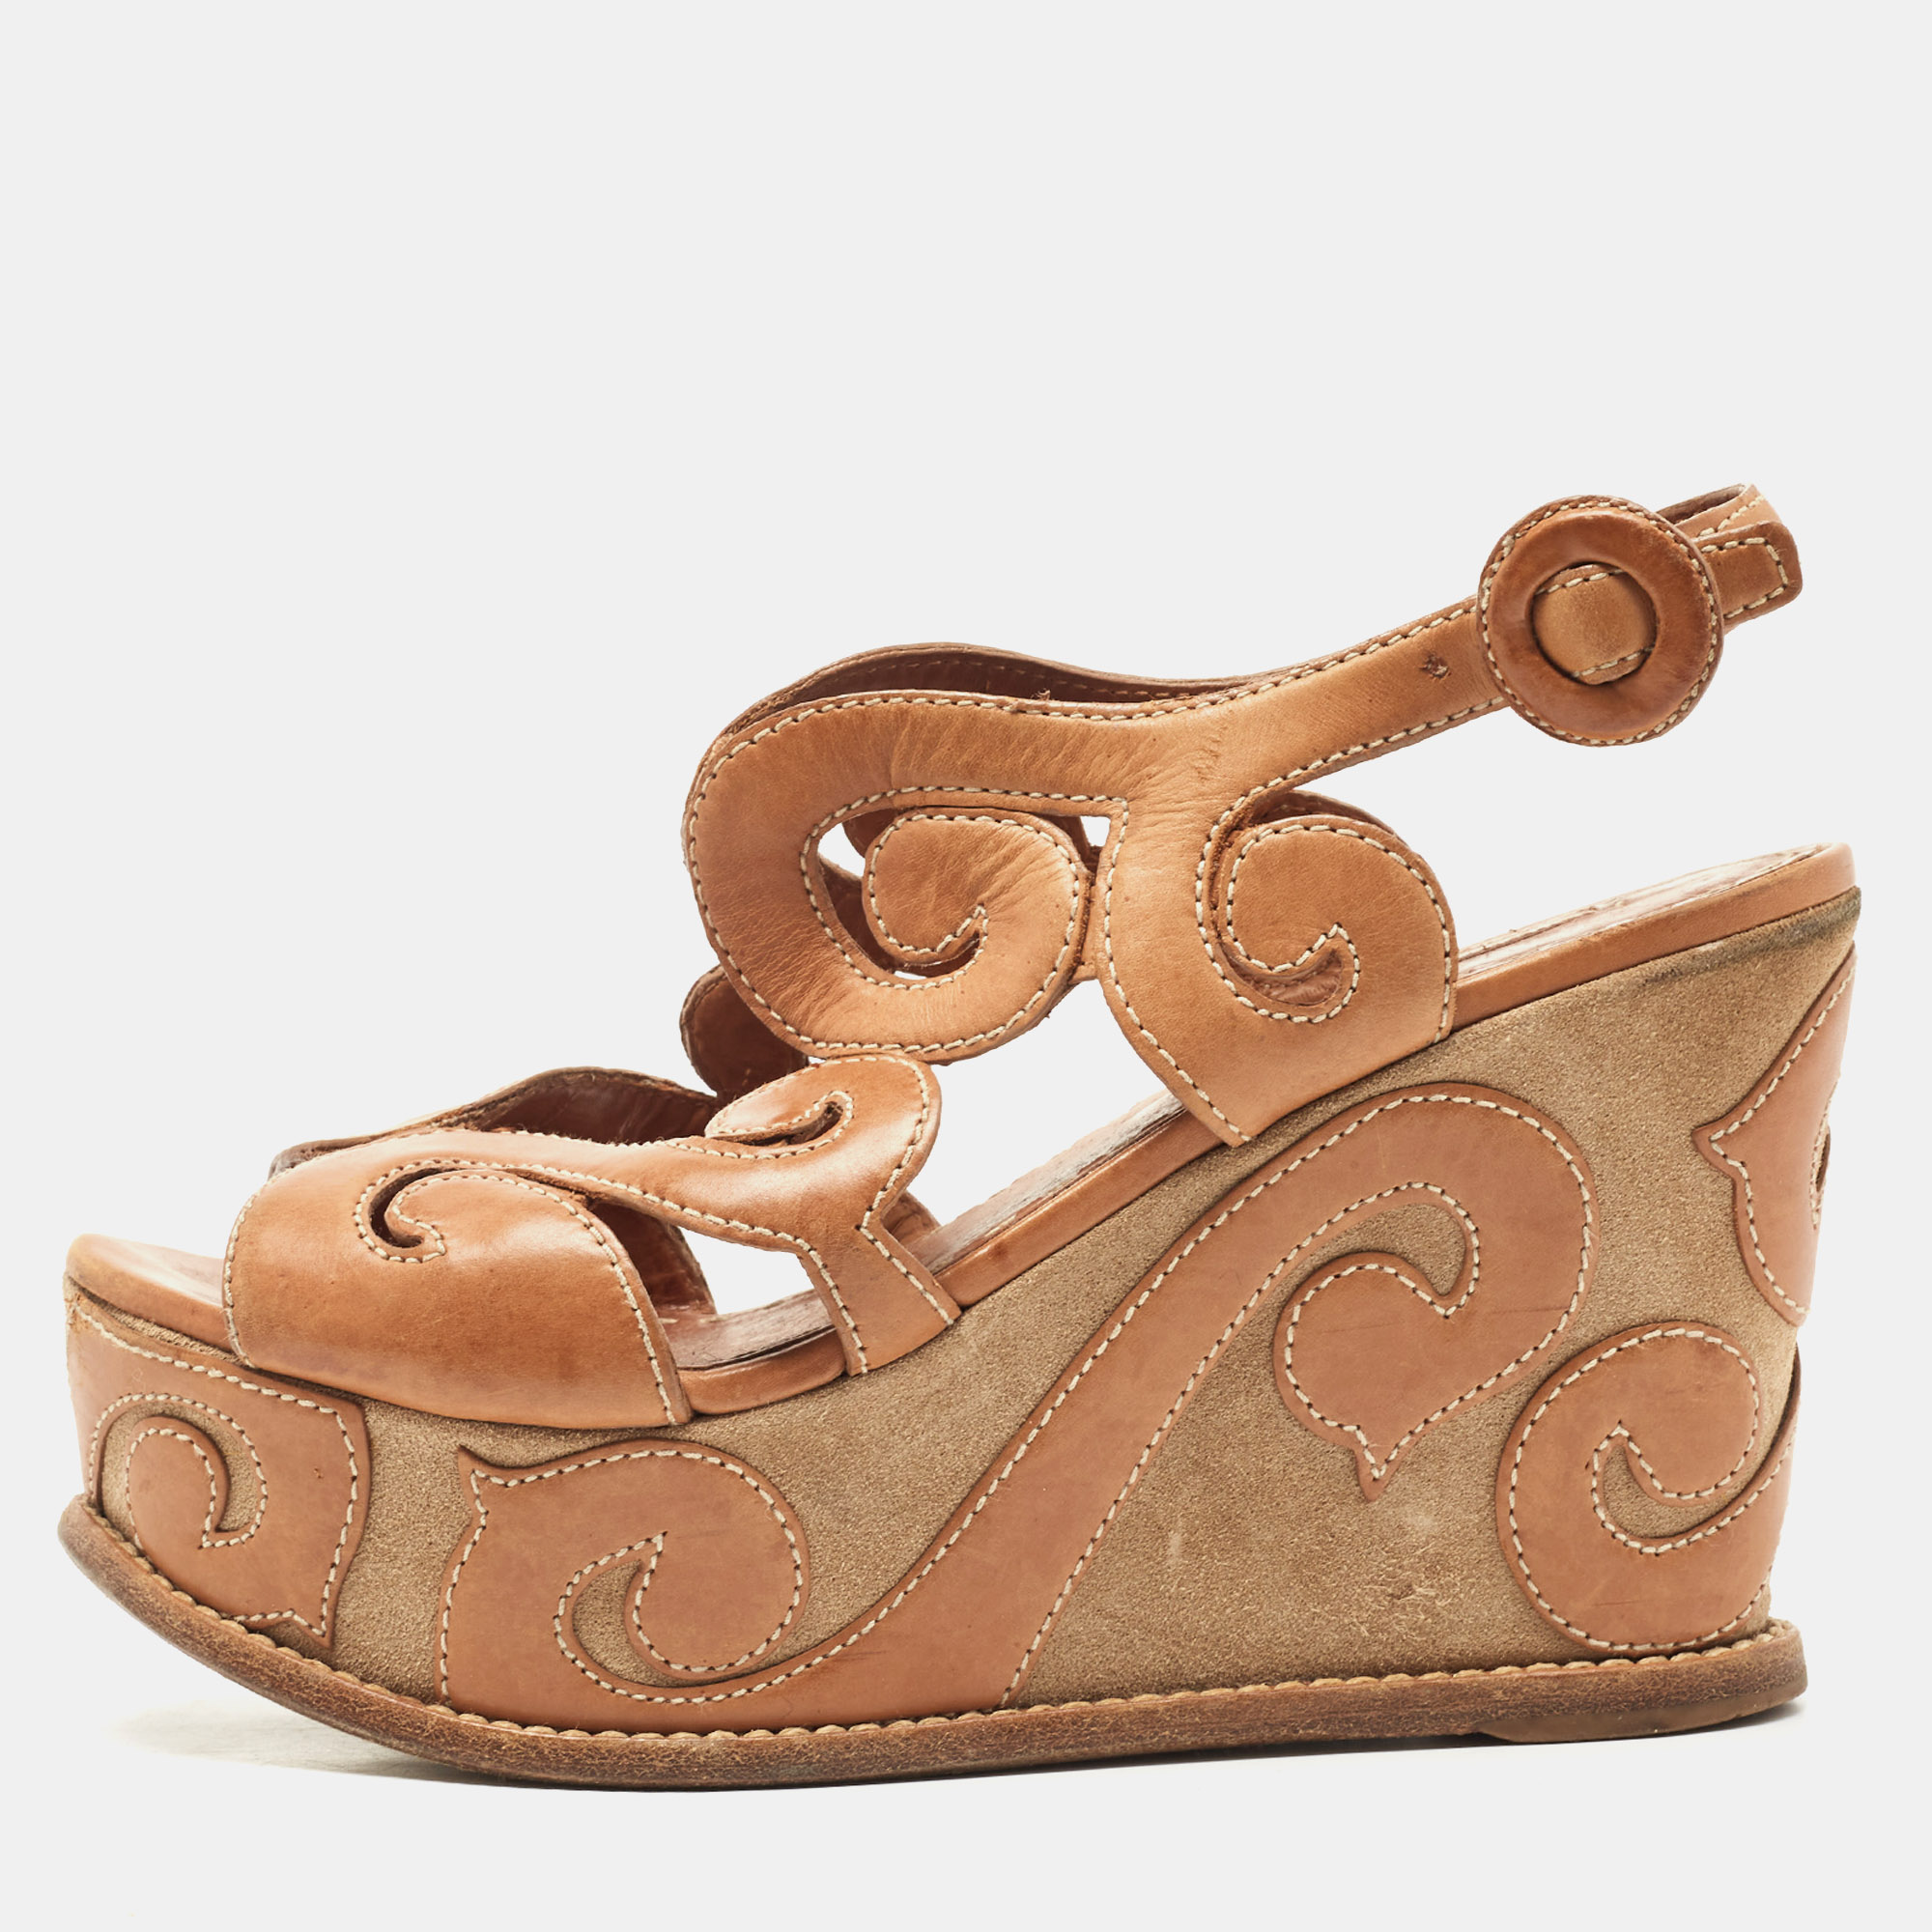 Prada Brown Leather Cut Out Wedge Sandals Size 36.5